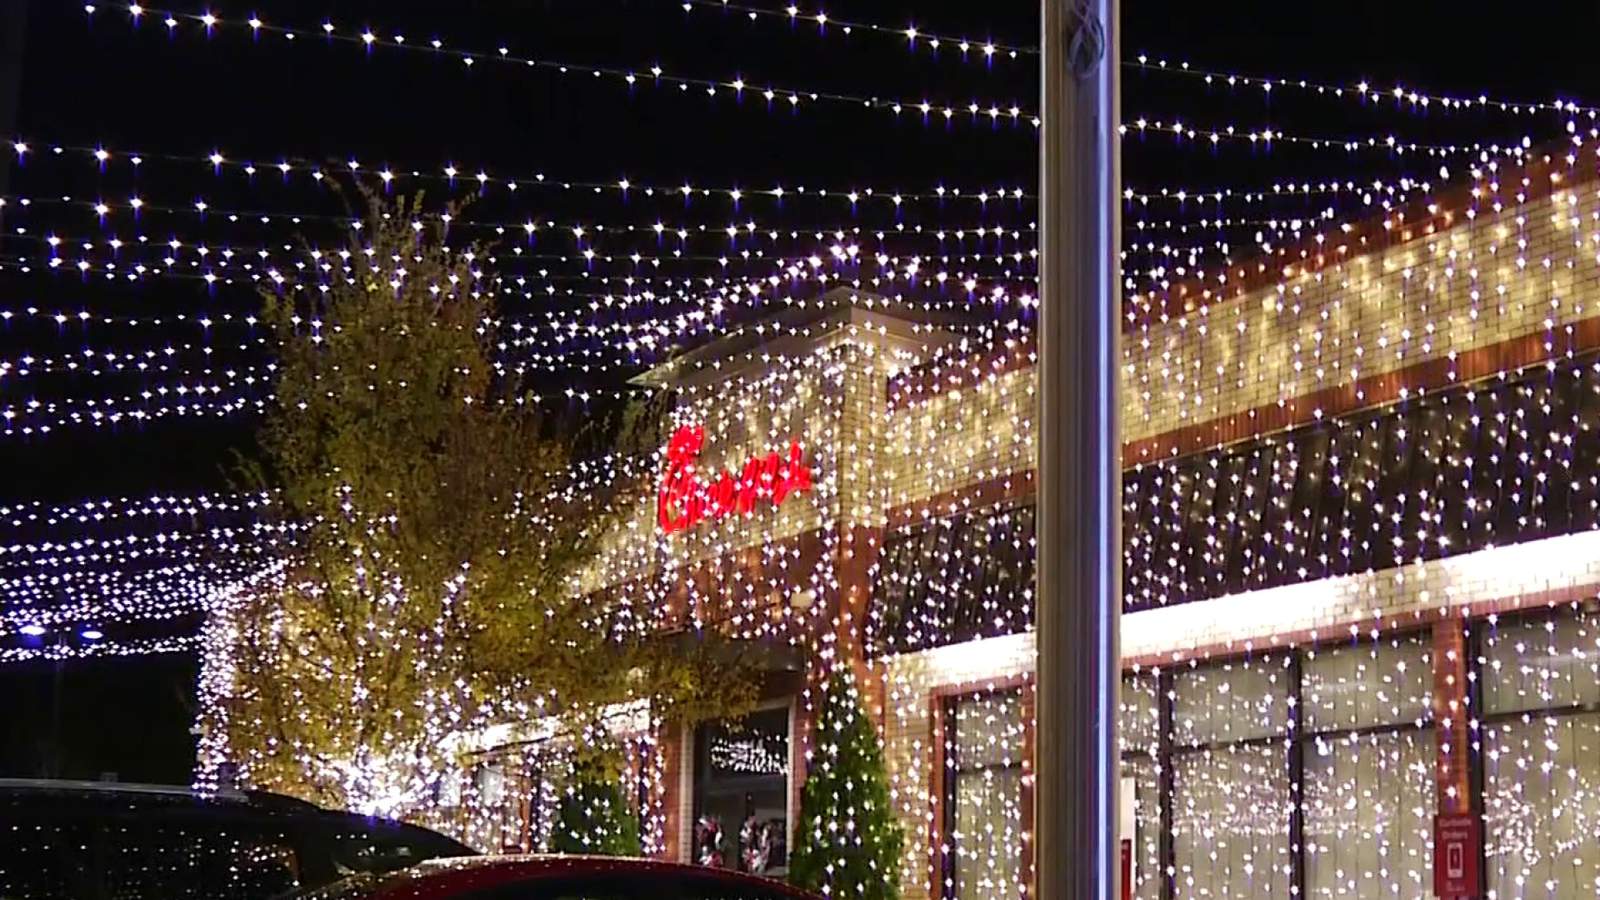 Love these Christmas lights? Nominate someone in need to win the same holiday light makeover!